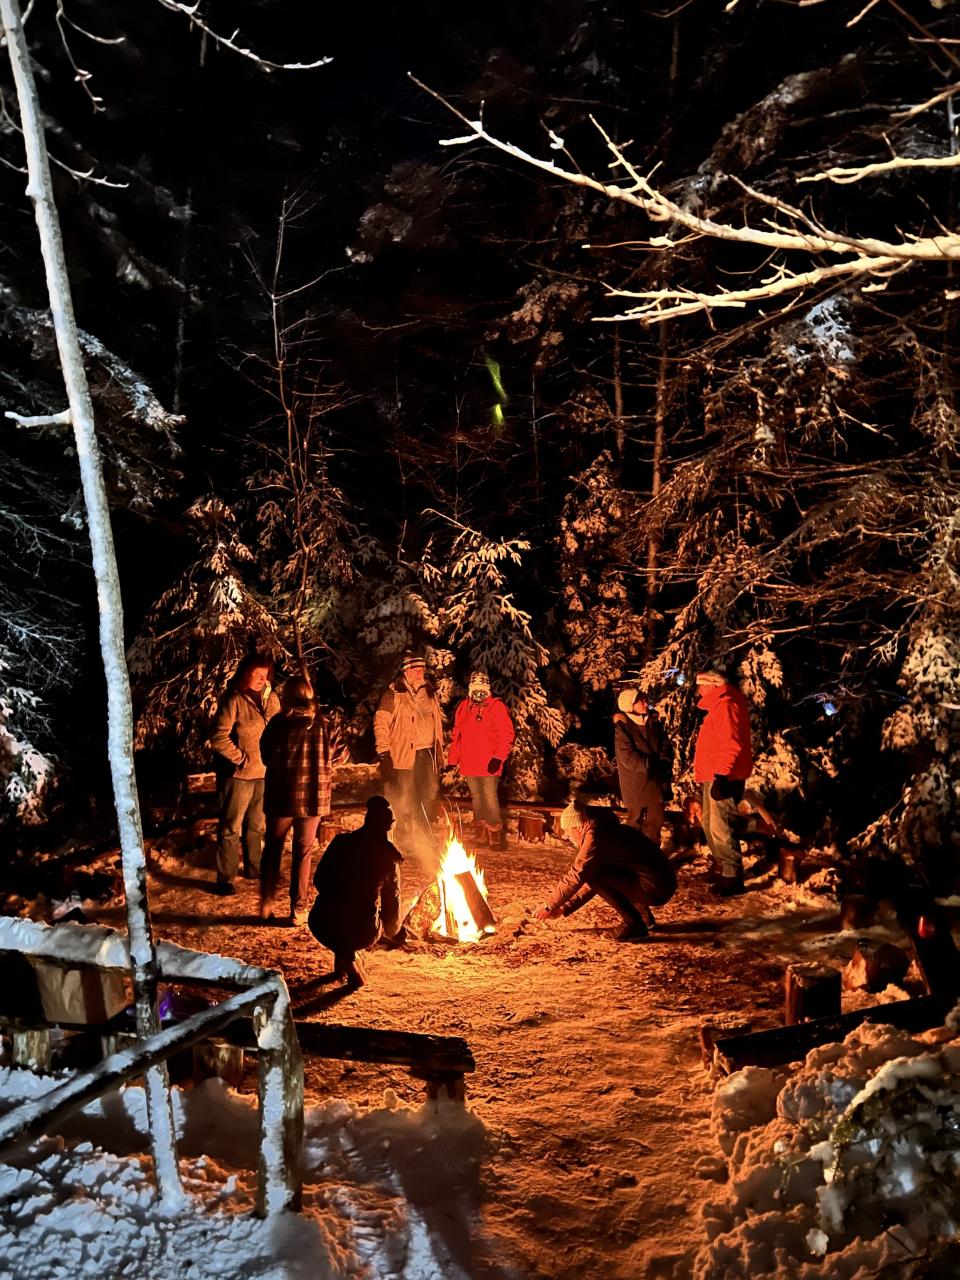 Guests can gather around an outdoor fire to get warm and roast chestnuts and marshmallows during Natural Christmas, taking place Dec. 10 at The Ridges Sanctuary in Baileys Harbor.